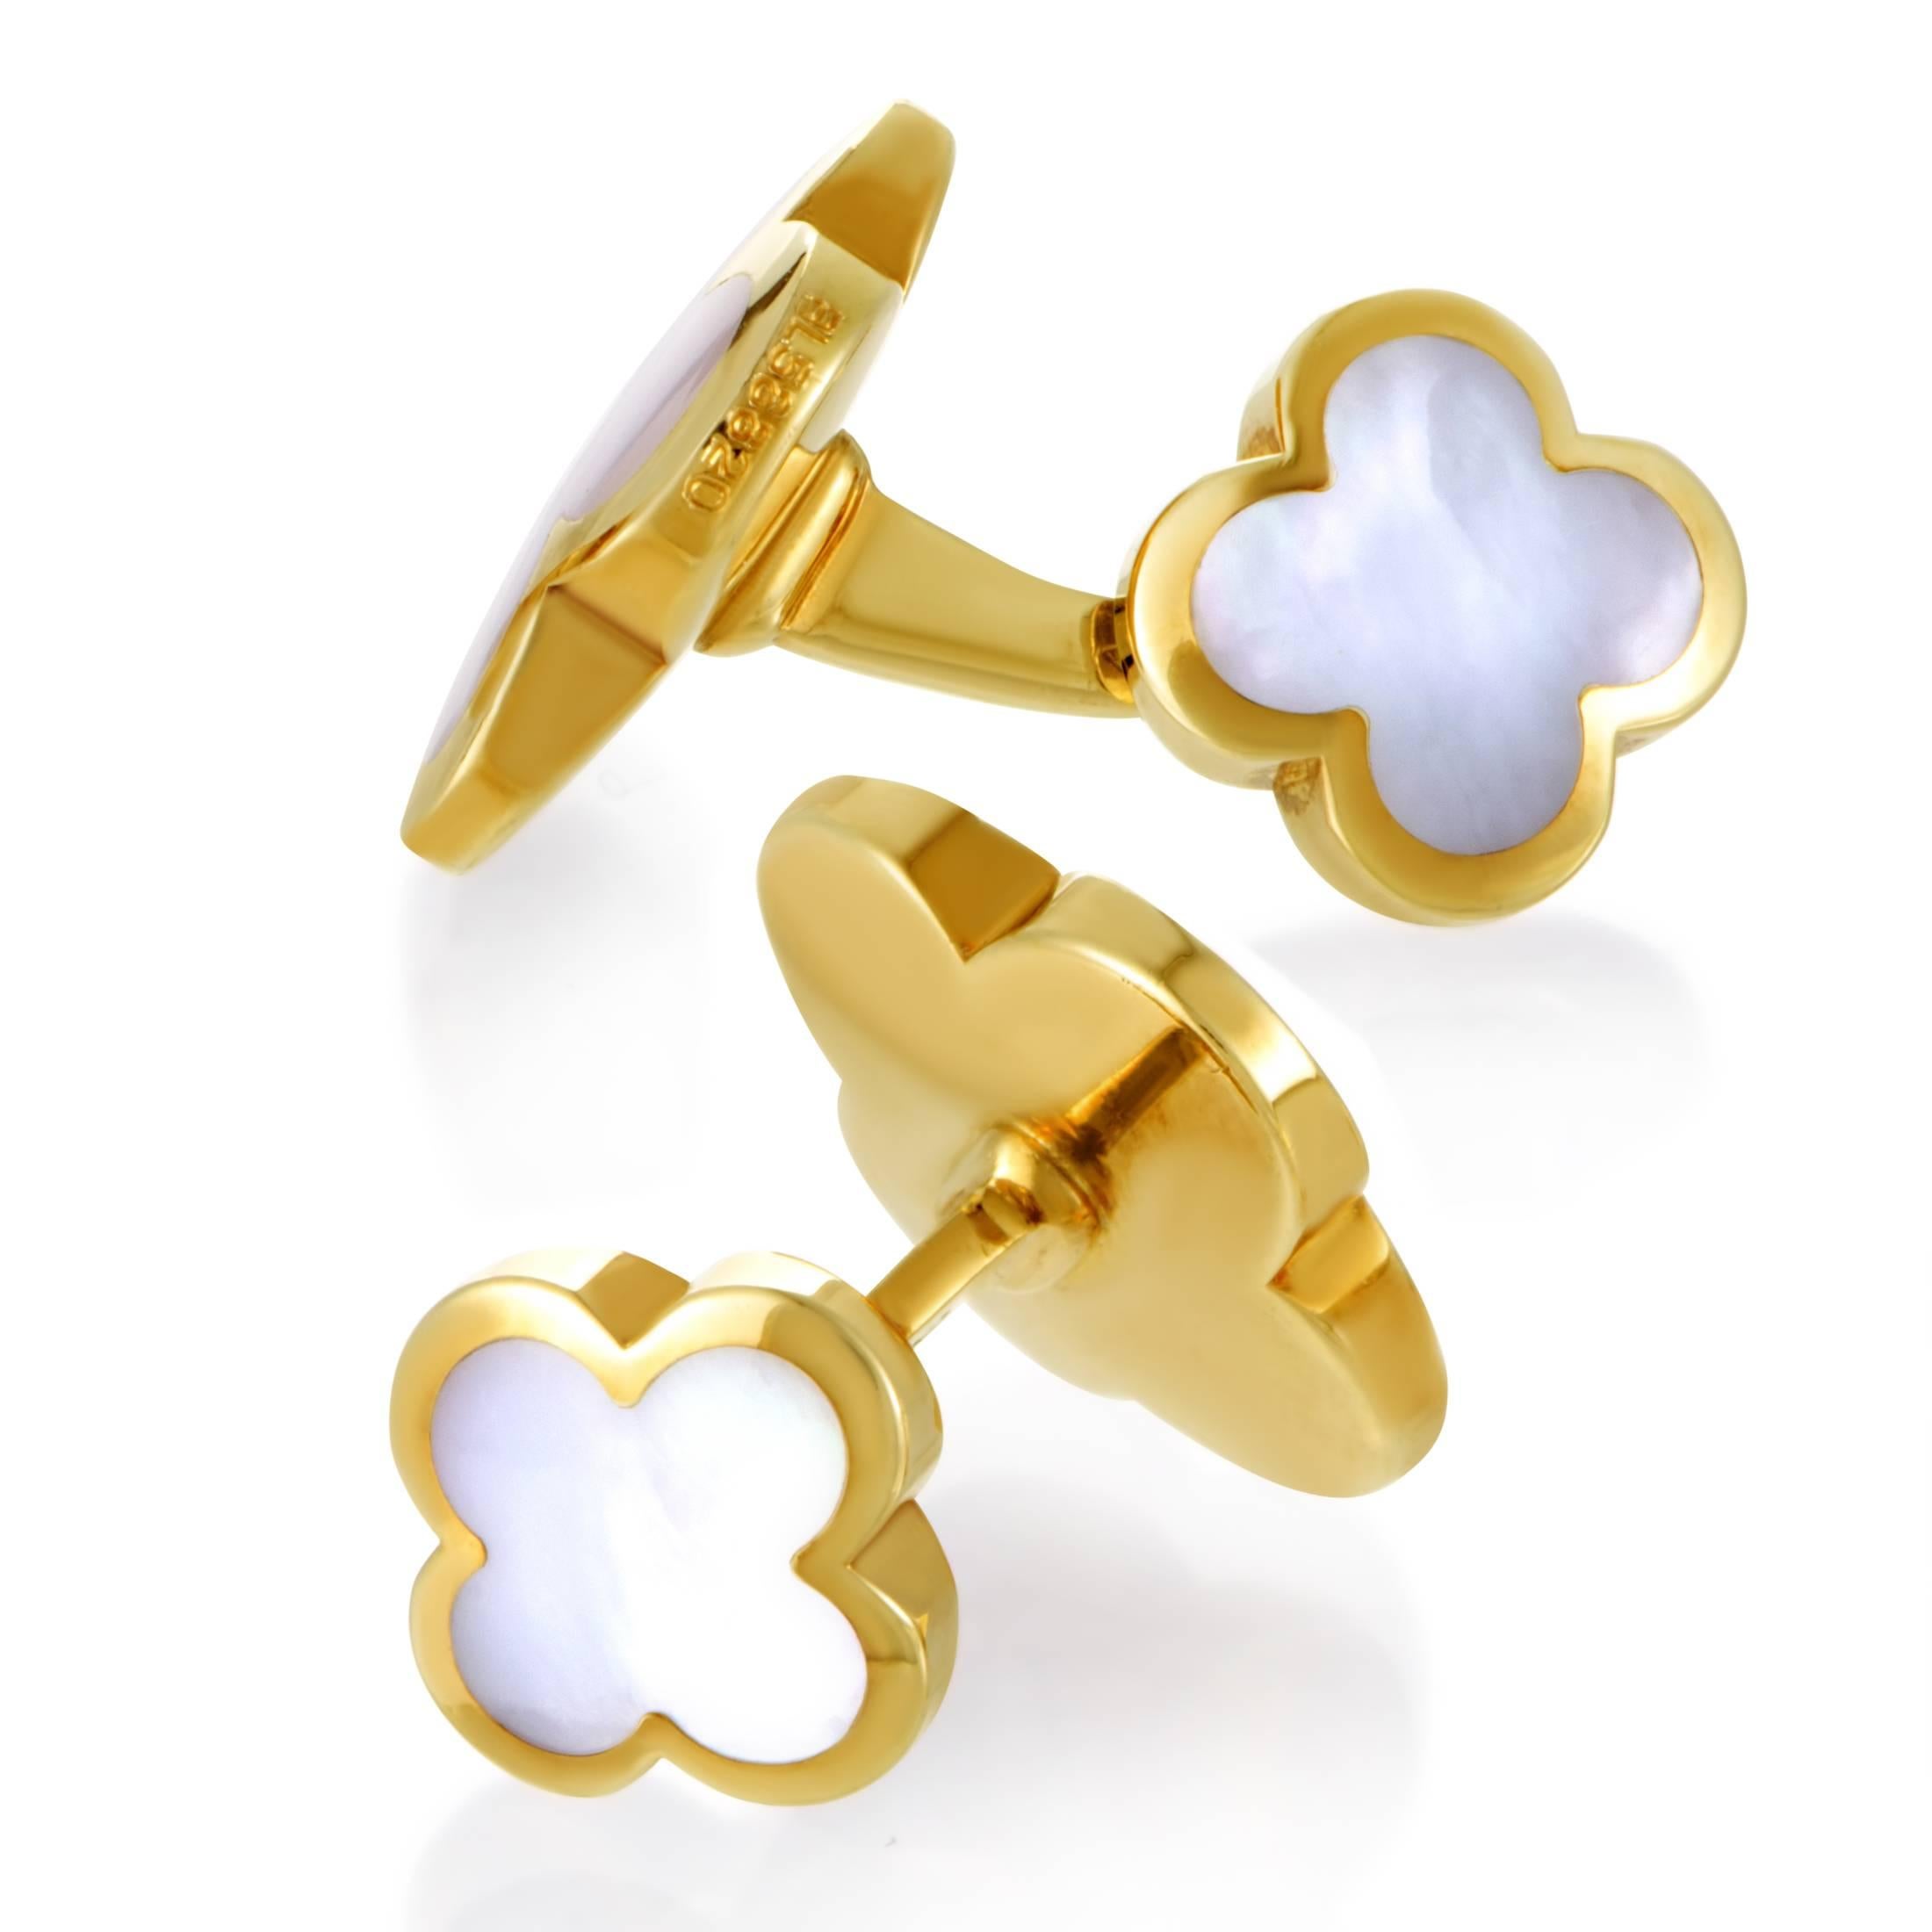 Boasting the appealing and instantly recognizable motif of the famed Alhambra collection, these elegant cufflinks from Van Cleef & Arpels are made of spotless 18K yellow gold and set with splendid mother of pearl to emphasize their neat